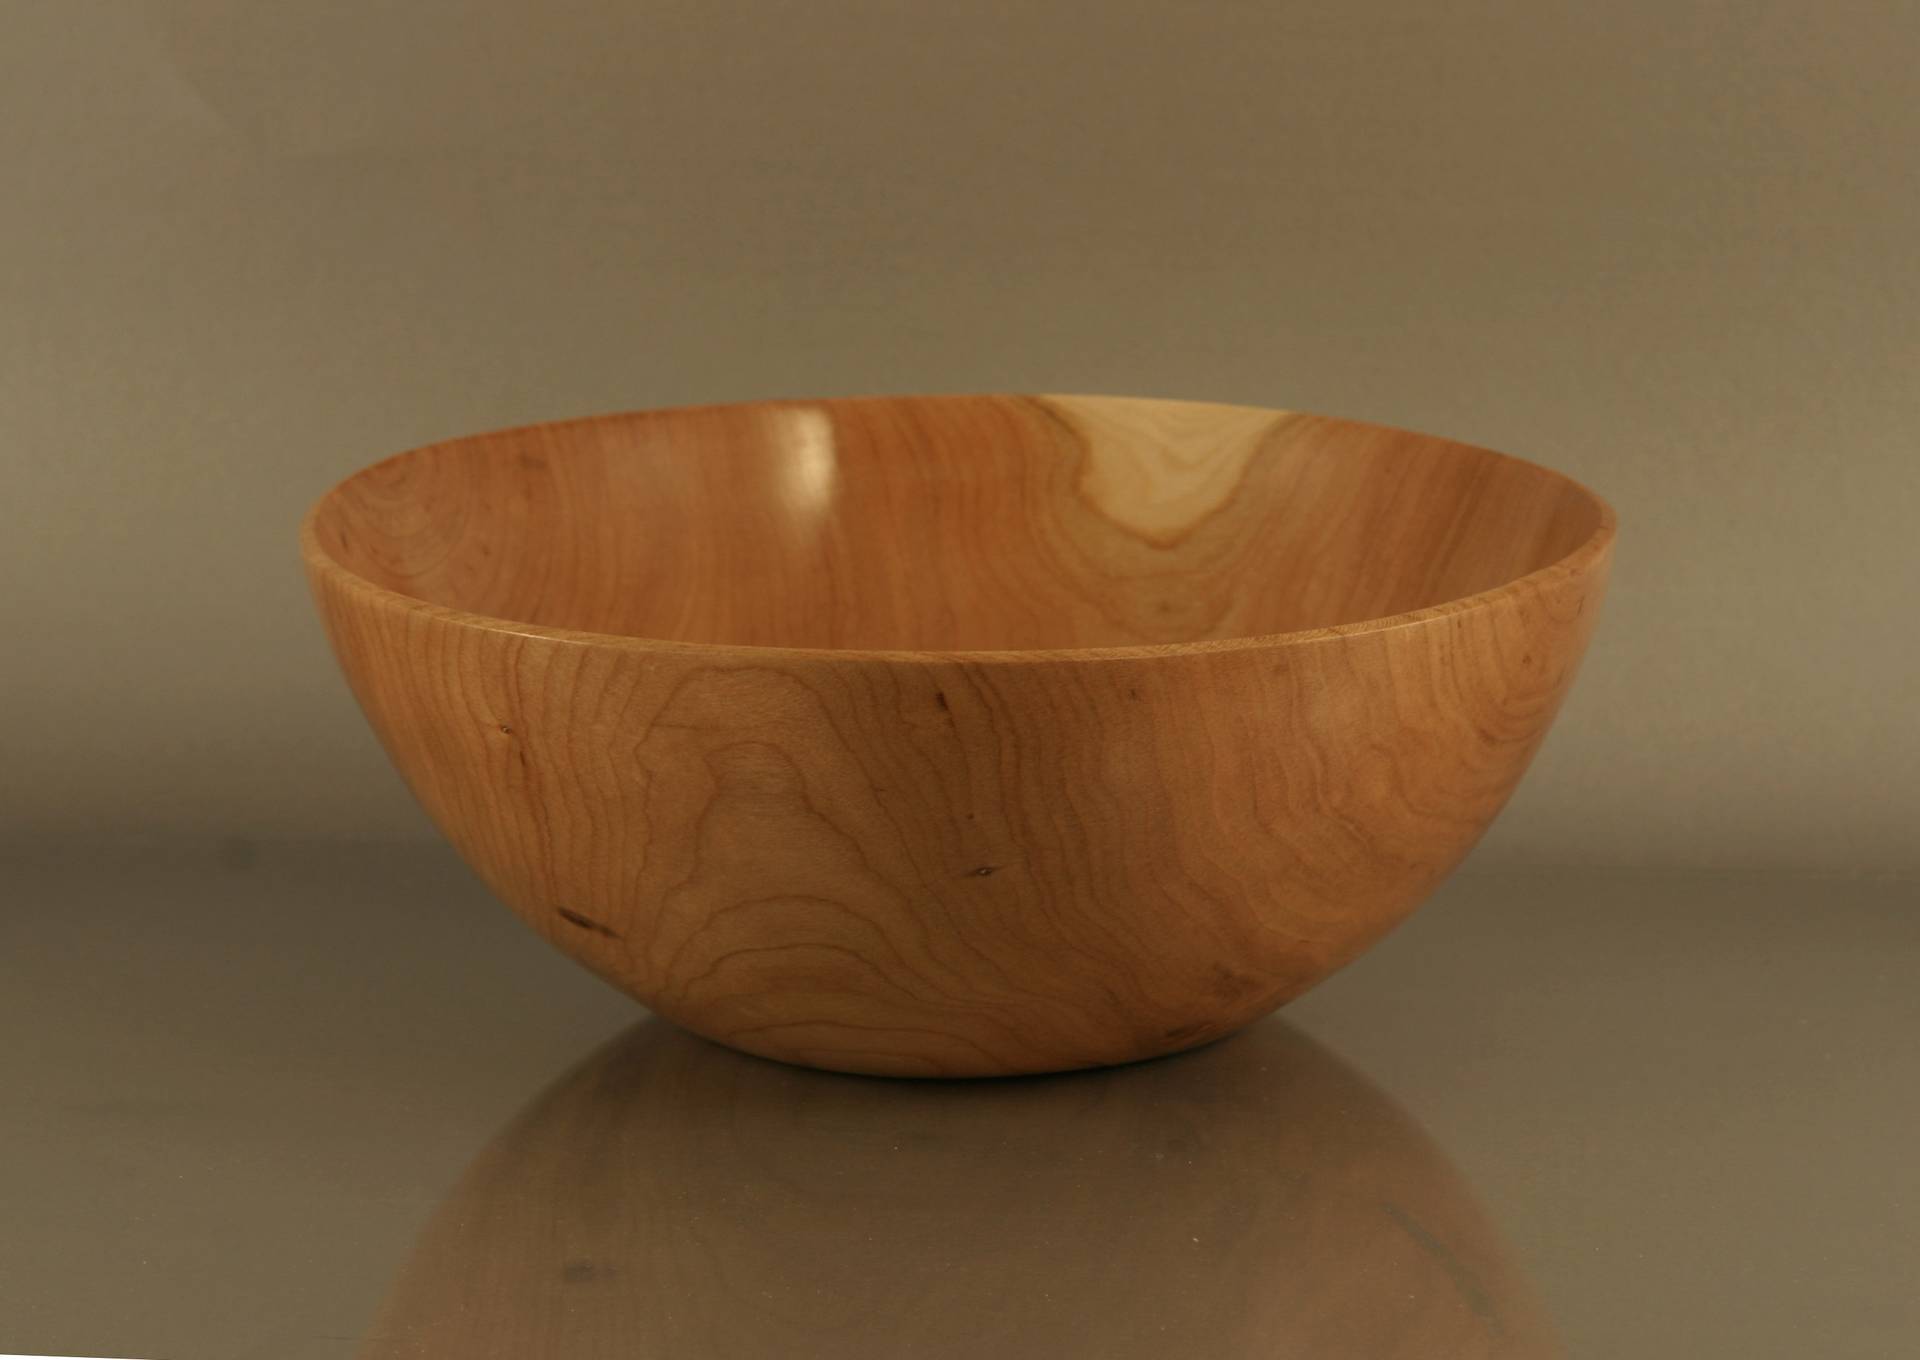 Cherry Bowl - Clean and Simple